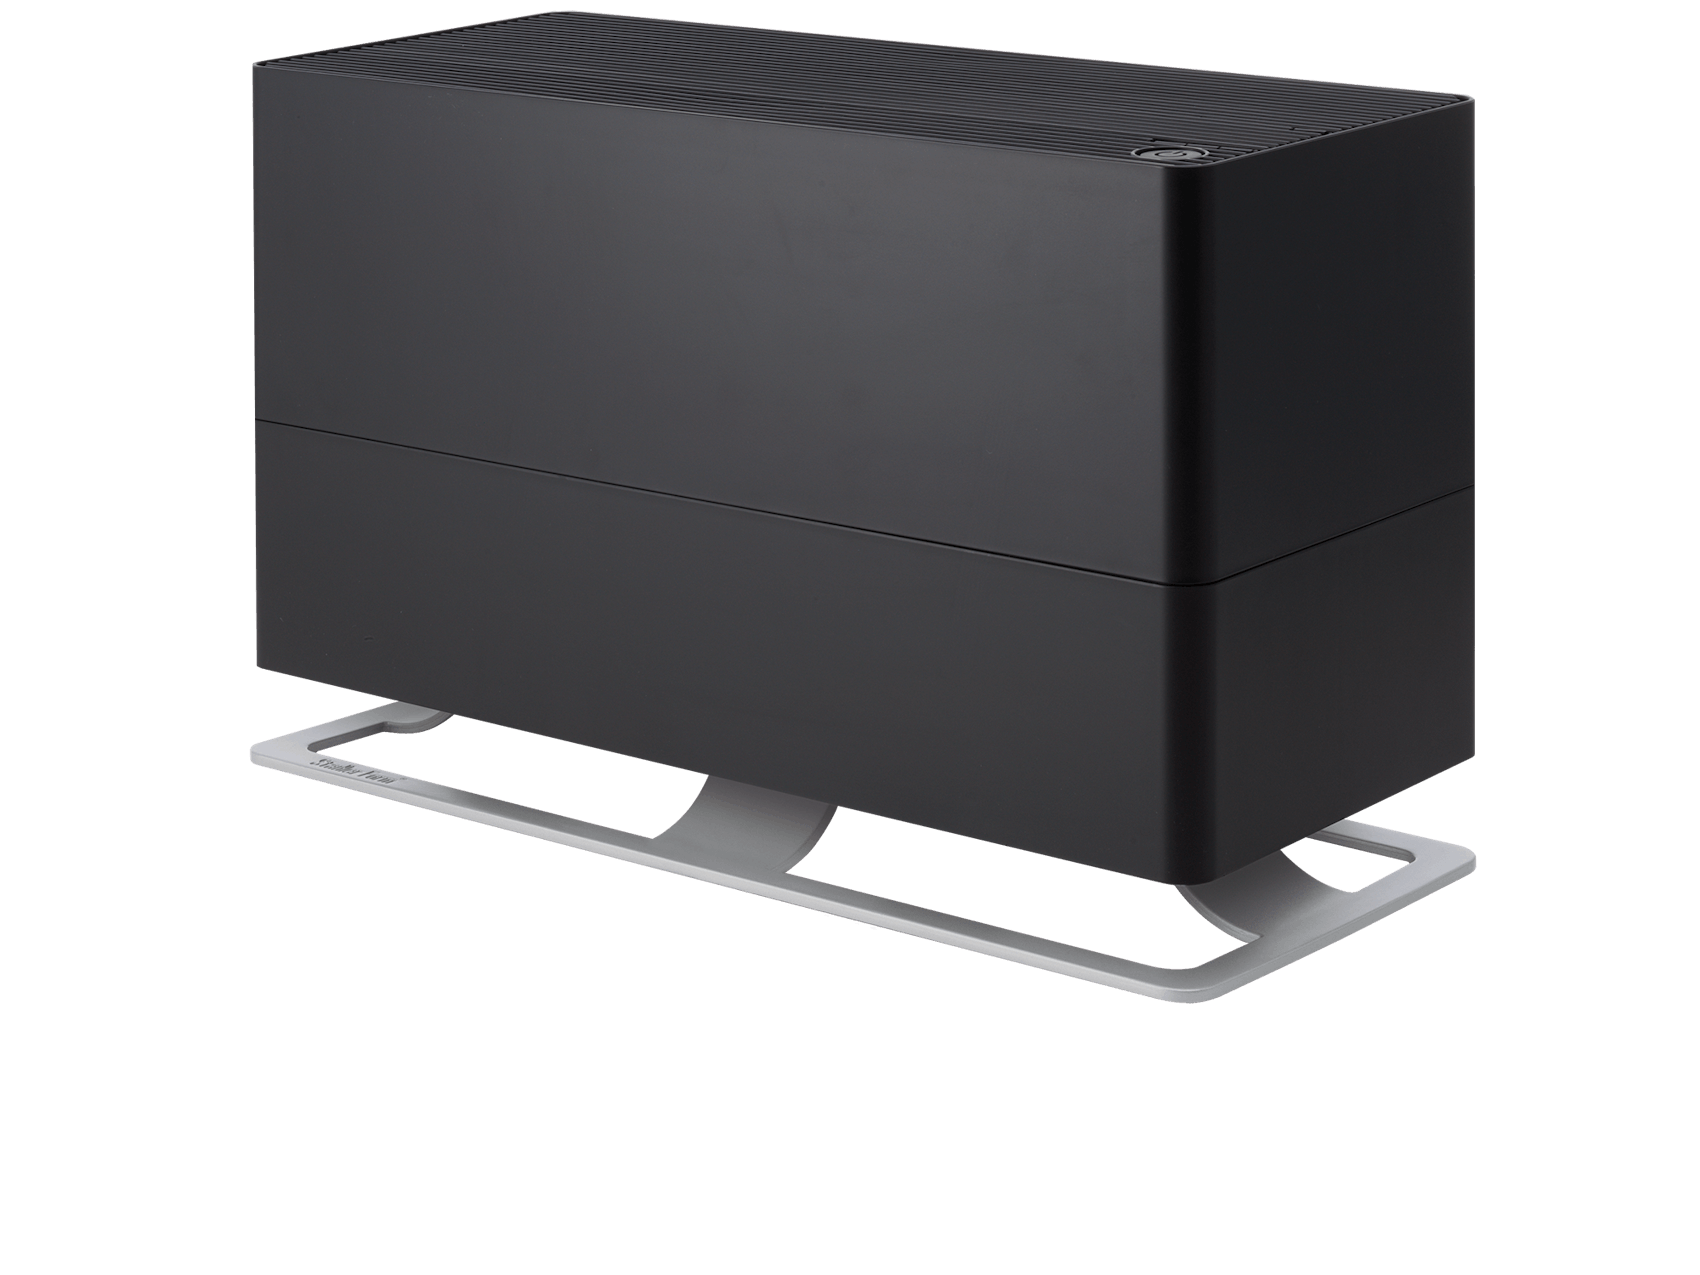 Oskar big humidifier by Stadler Form in black as perspective view